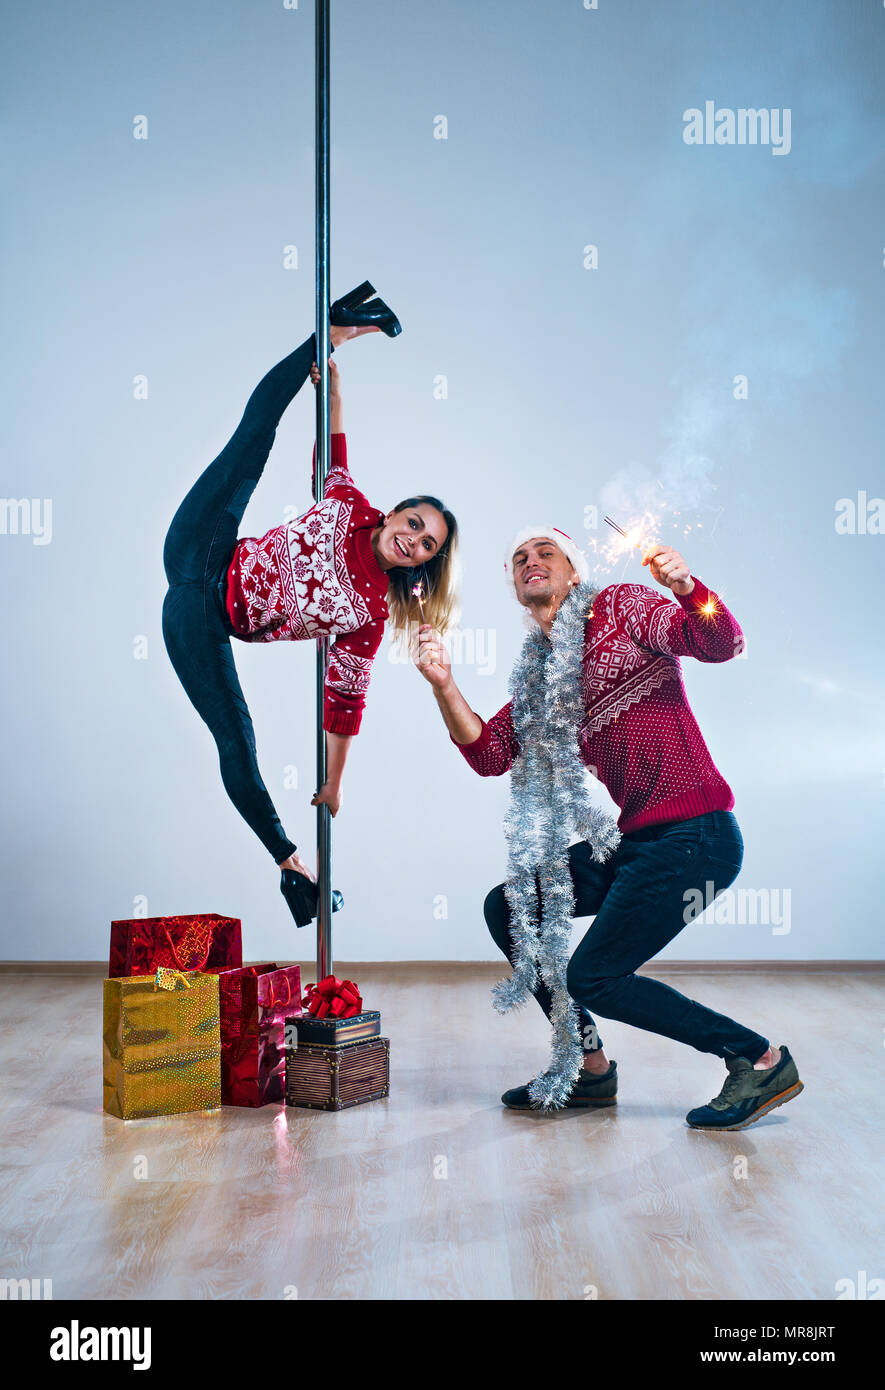 Young man and woman pole dancers in winter new year clothing celebrating Stock Photo